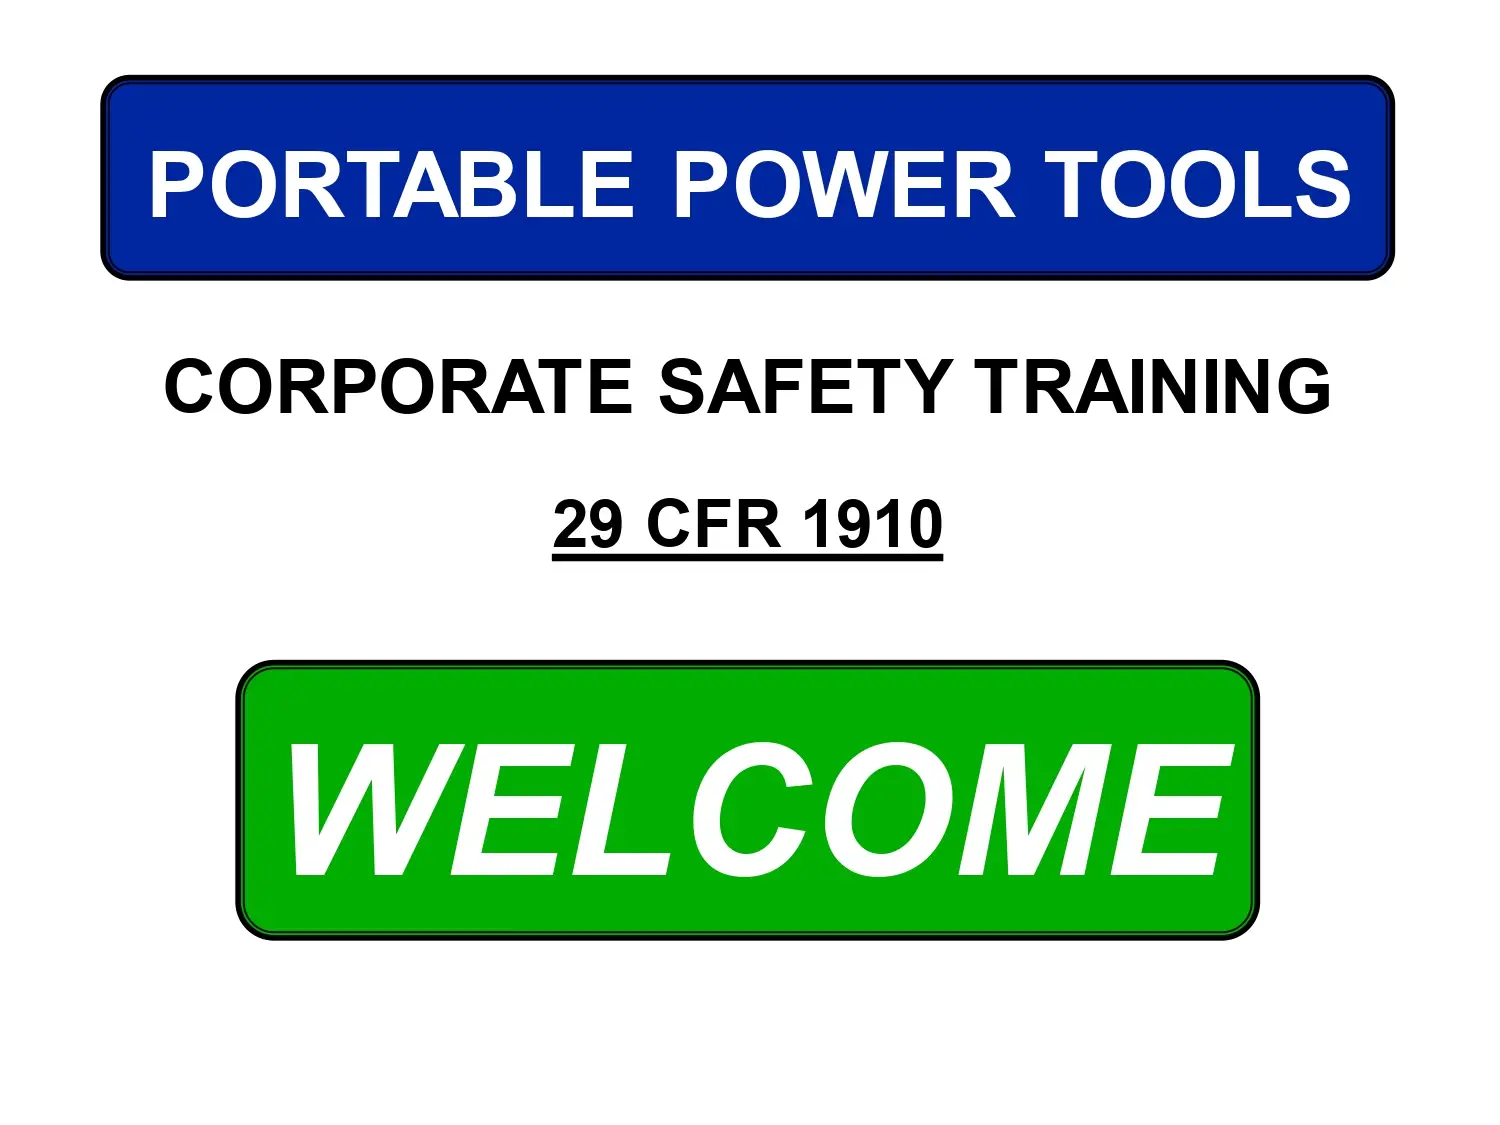 Portable Power Tools Corporate Safety Training